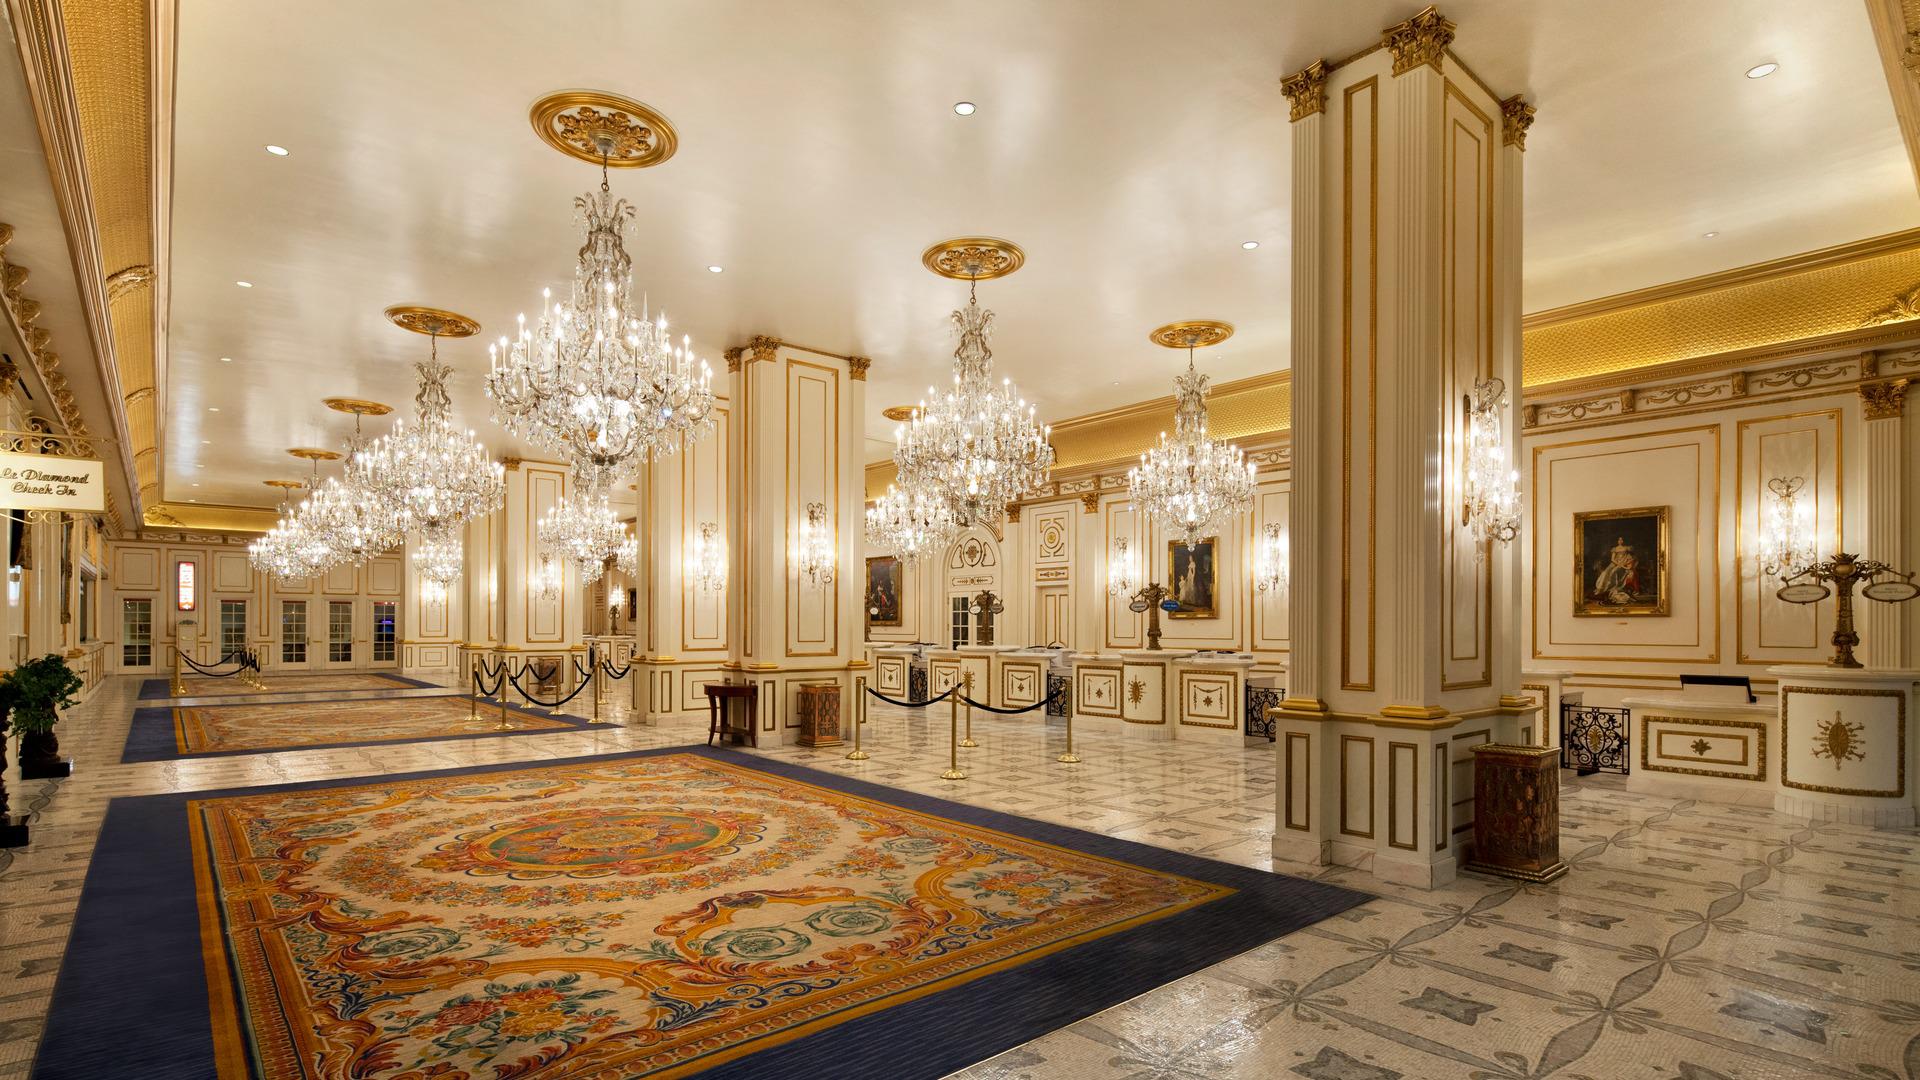 Iconic Paris Las Vegas Hotel & Casino located in the heart of Vegas strip. Guest rooms at Paris Las Vegas Hotel & Casino have a distinctly chic European look, with Versailles-style fixtures and luxury romantic décor.